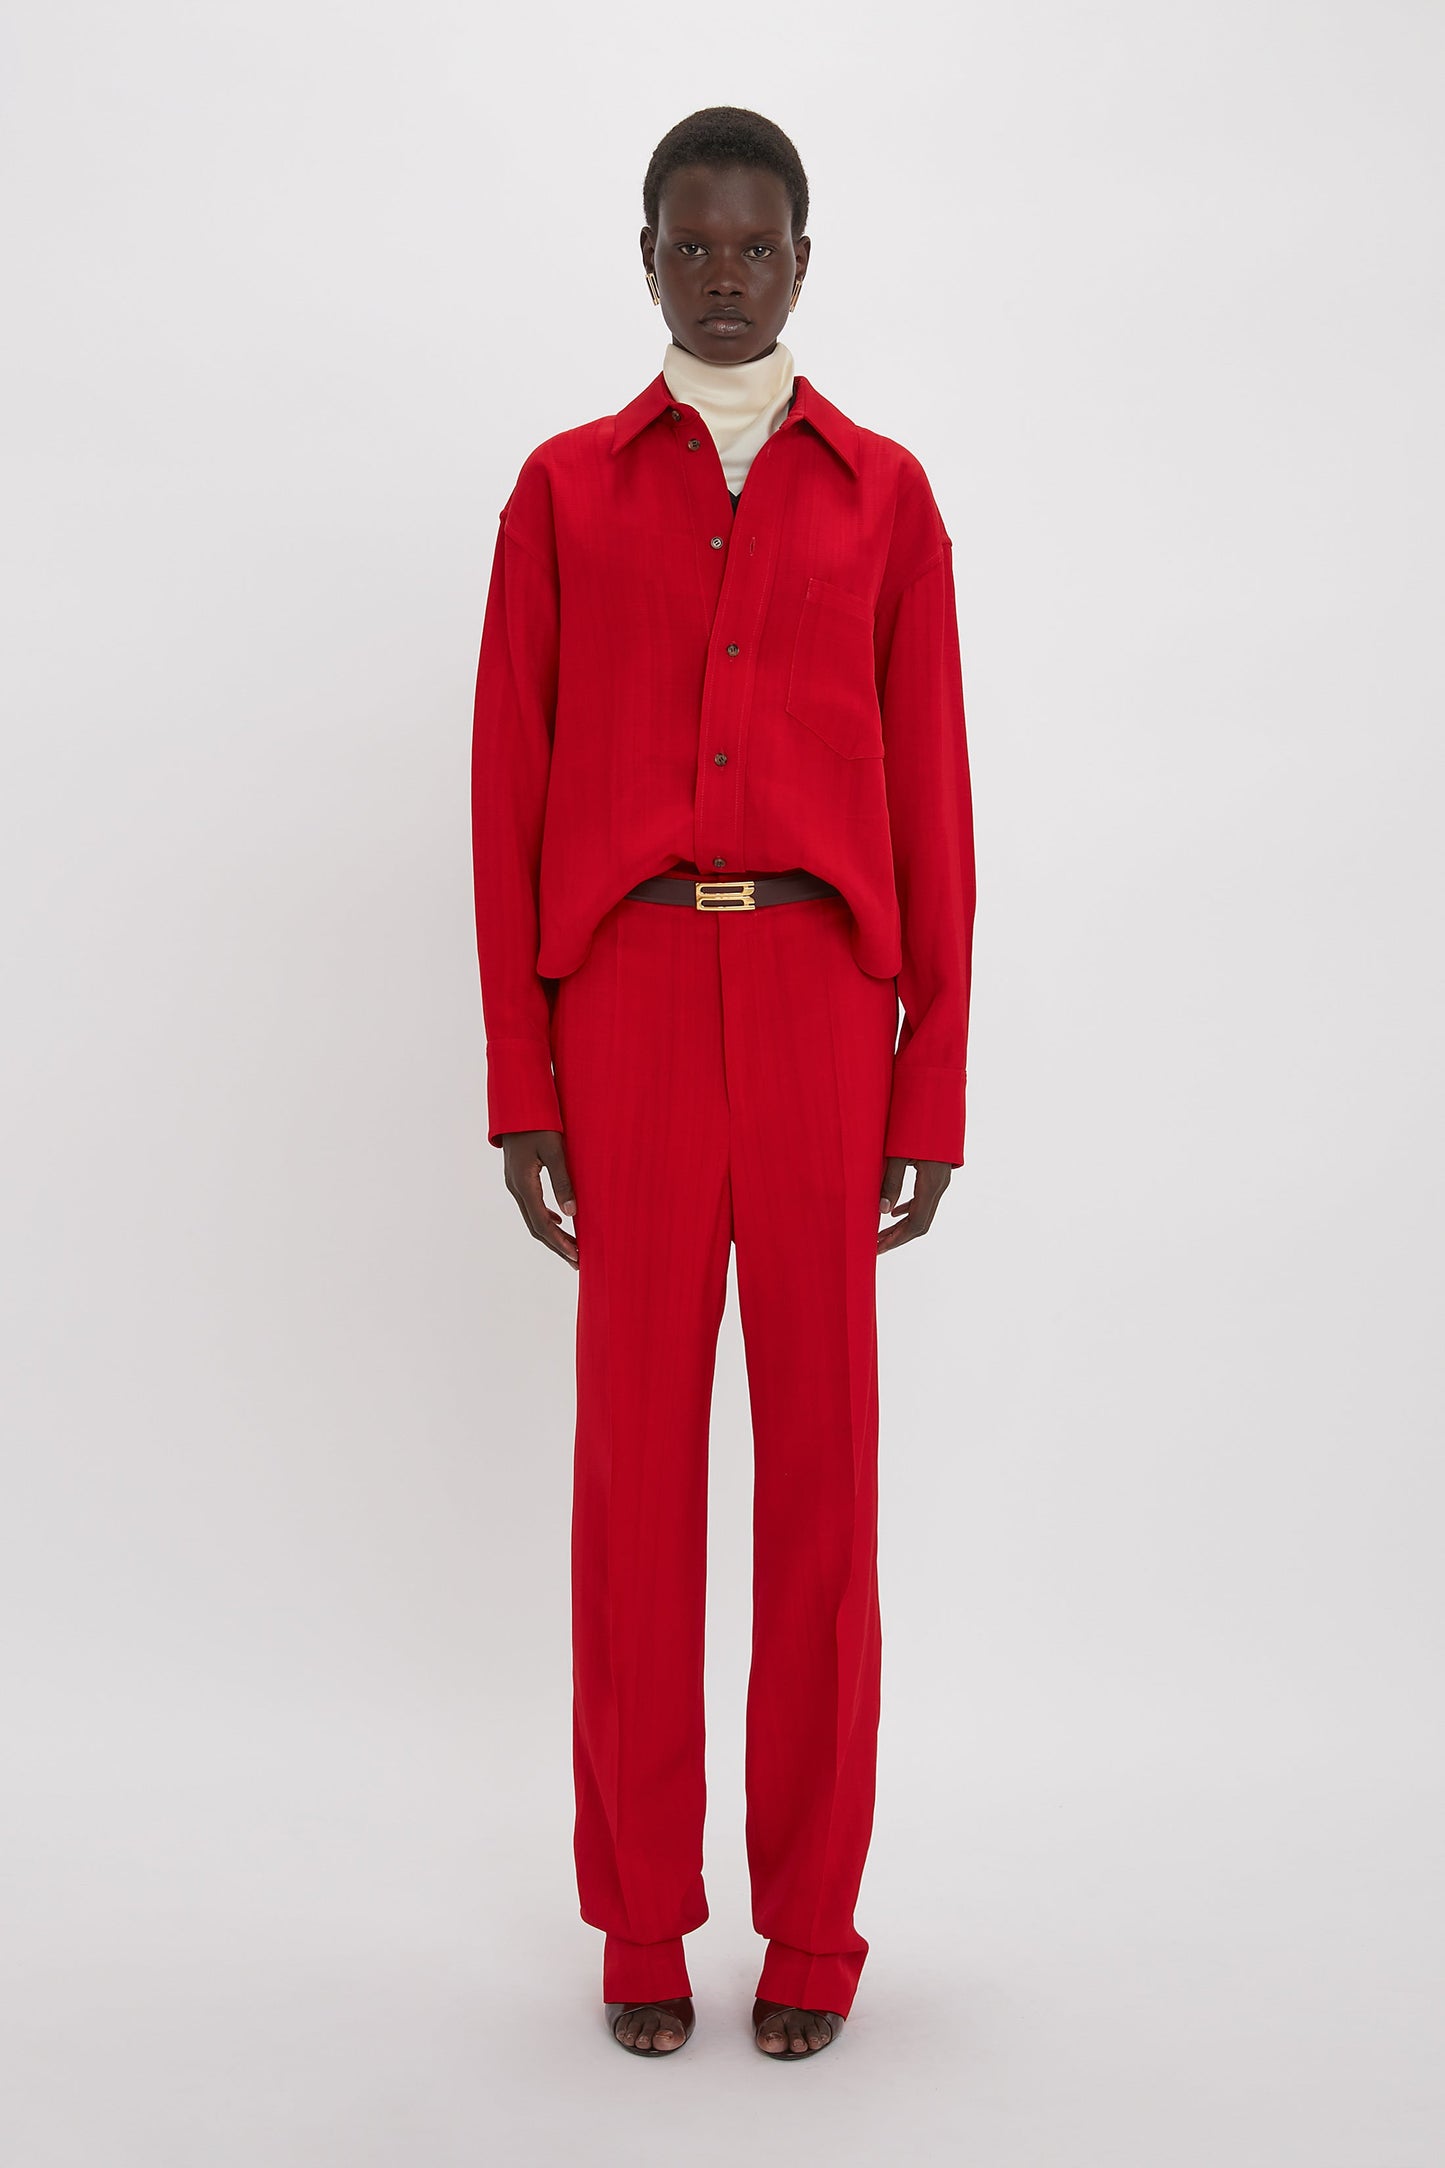 Person wearing a red button-up shirt and Victoria Beckham's Tapered Leg Trouser In Carmine, standing against a plain white background, showcasing a lean silhouette and refined traditional tailoring.